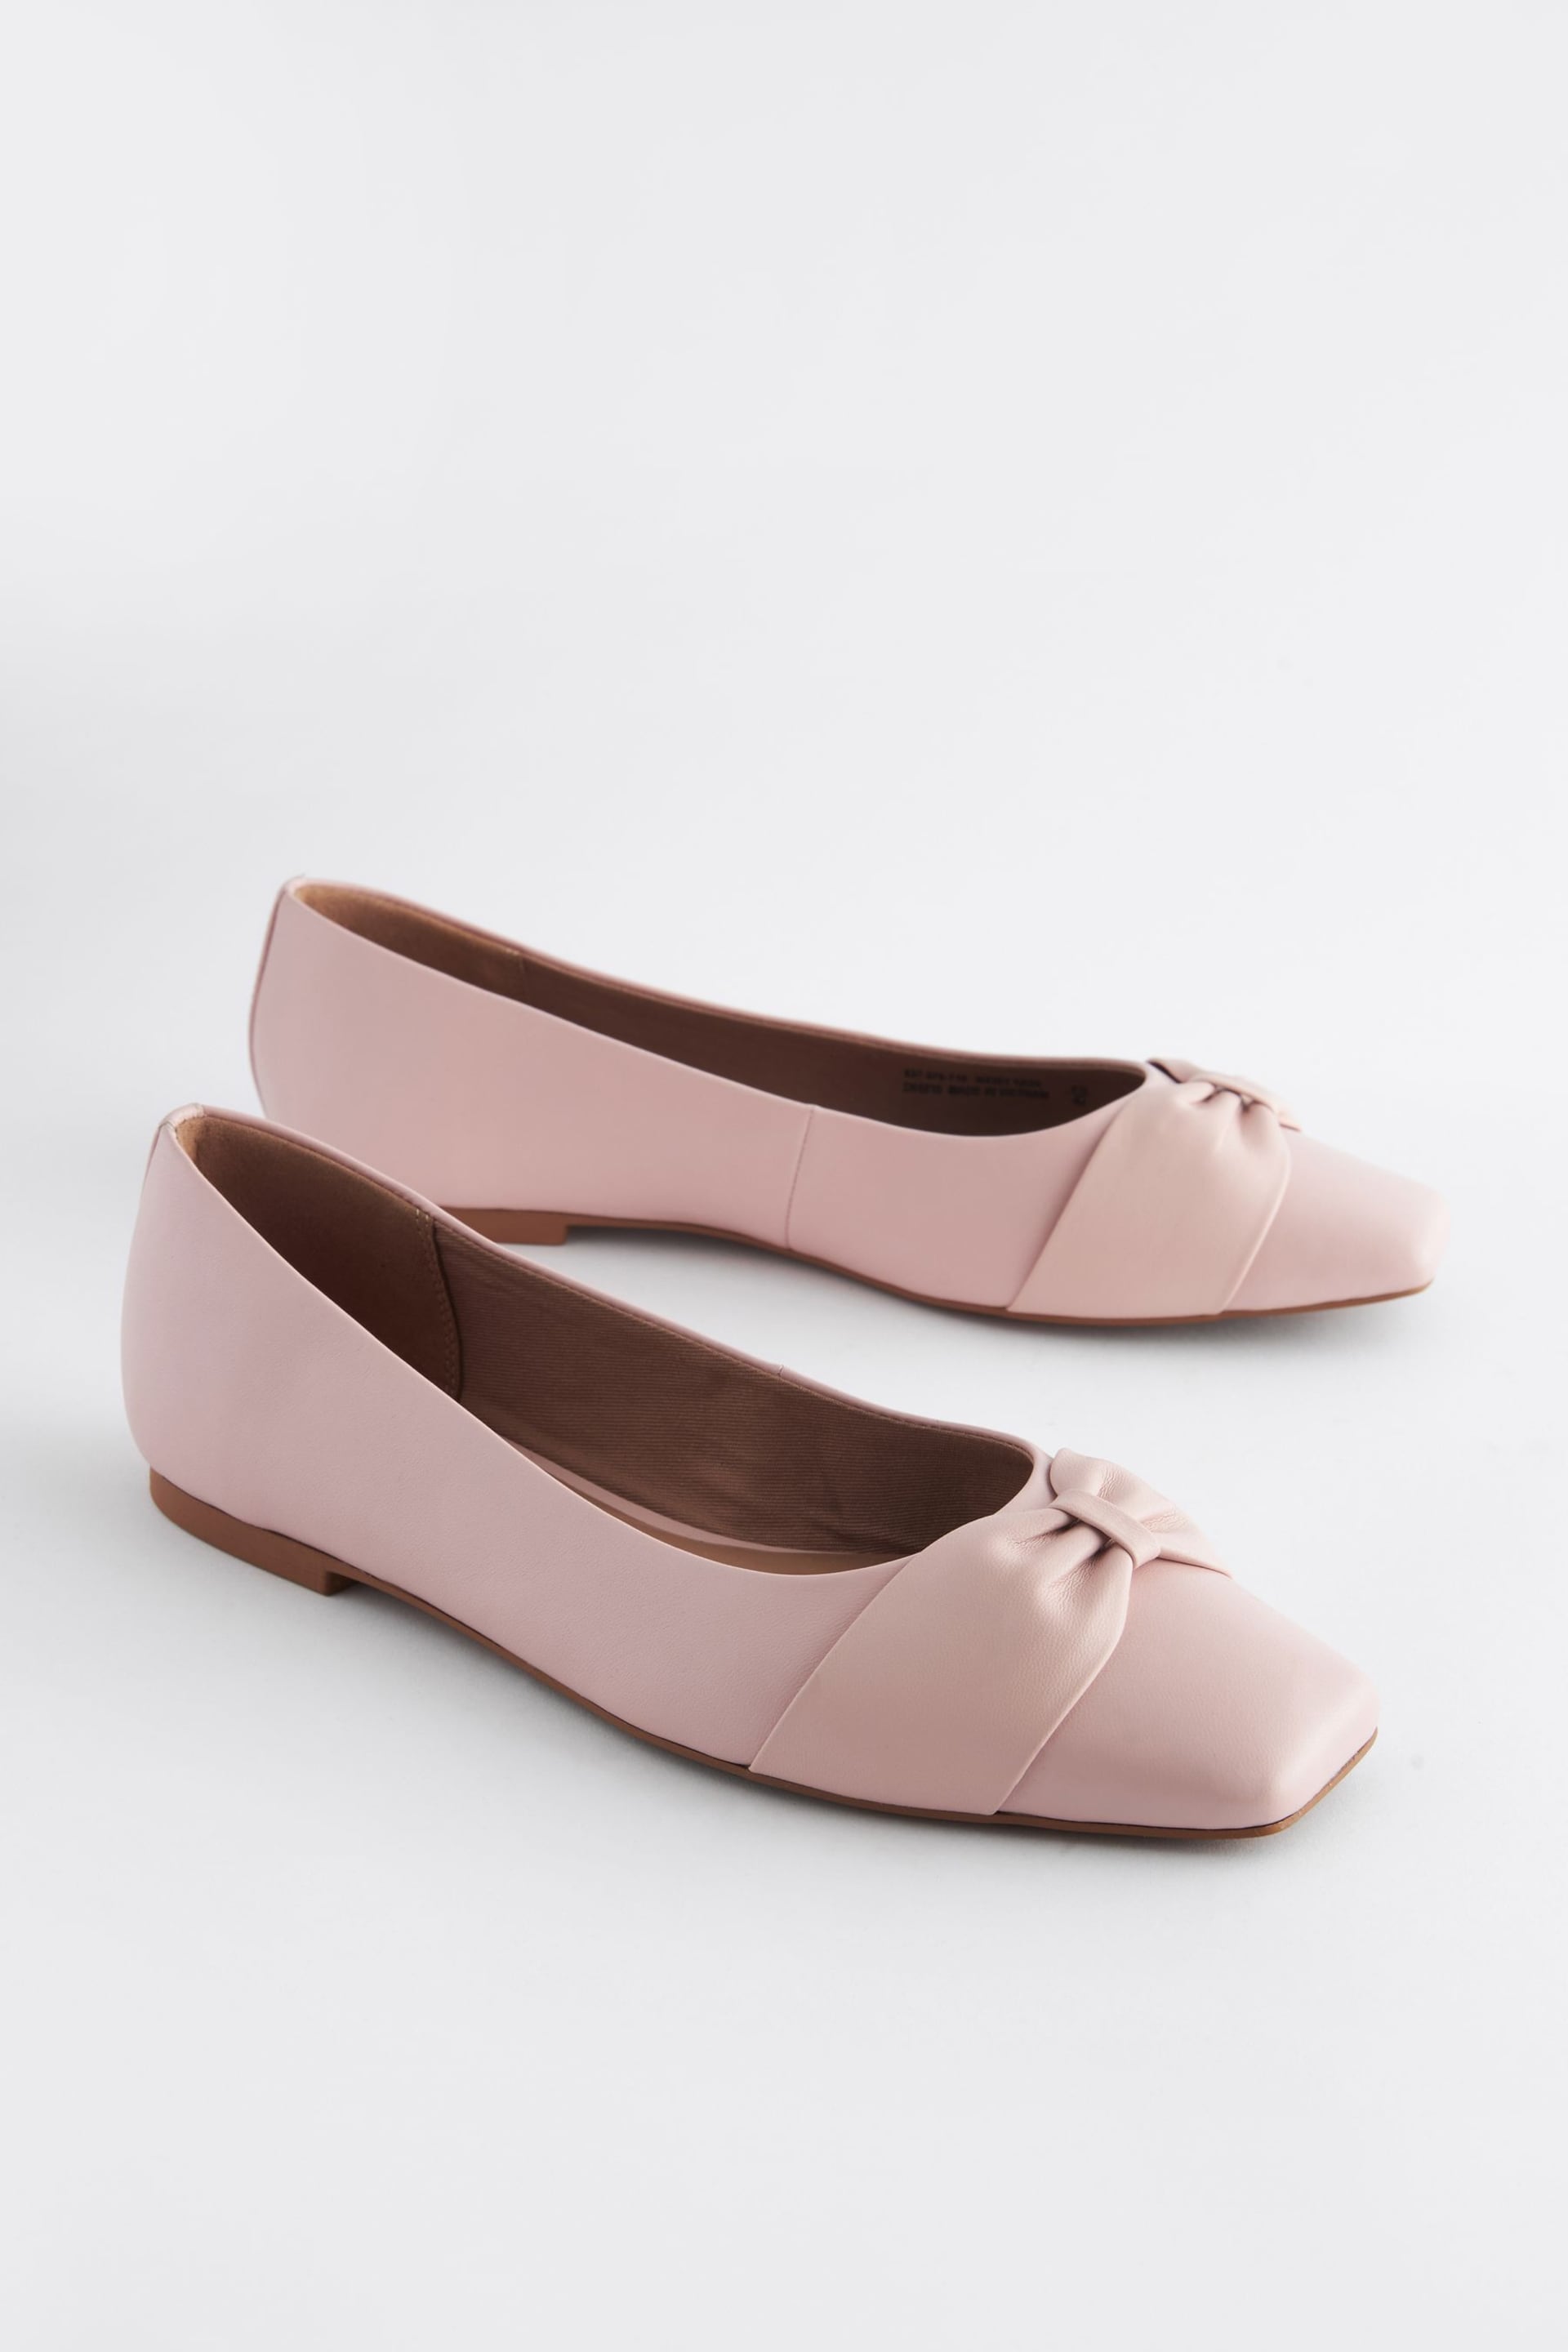 Pink Regular/Wide Fit Forever Comfort® Leather Square Toe Bow Ballerinas - Image 1 of 5